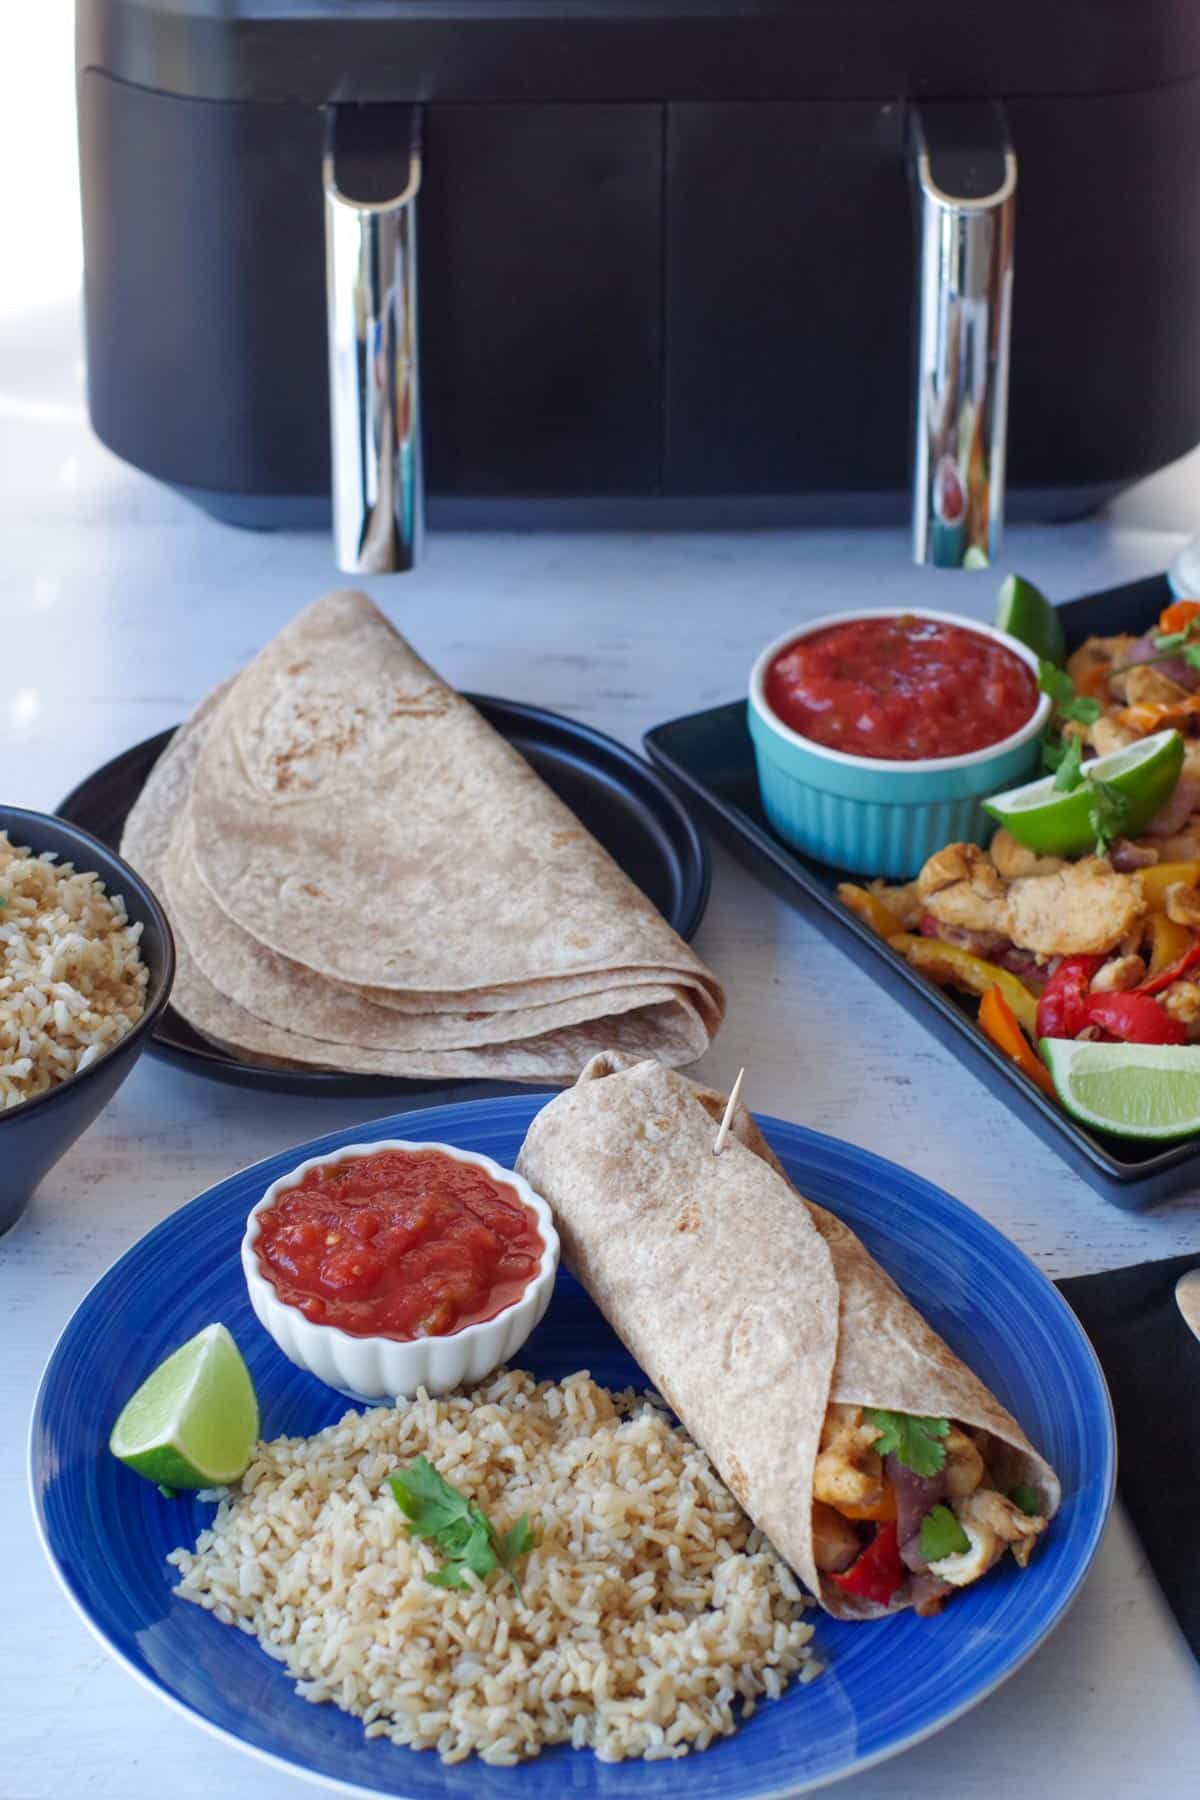 a blue plate with a fajita wrap and rice, then a tray of fajita mix, tortillas, rice and a Ninja foodi air fryer in the background